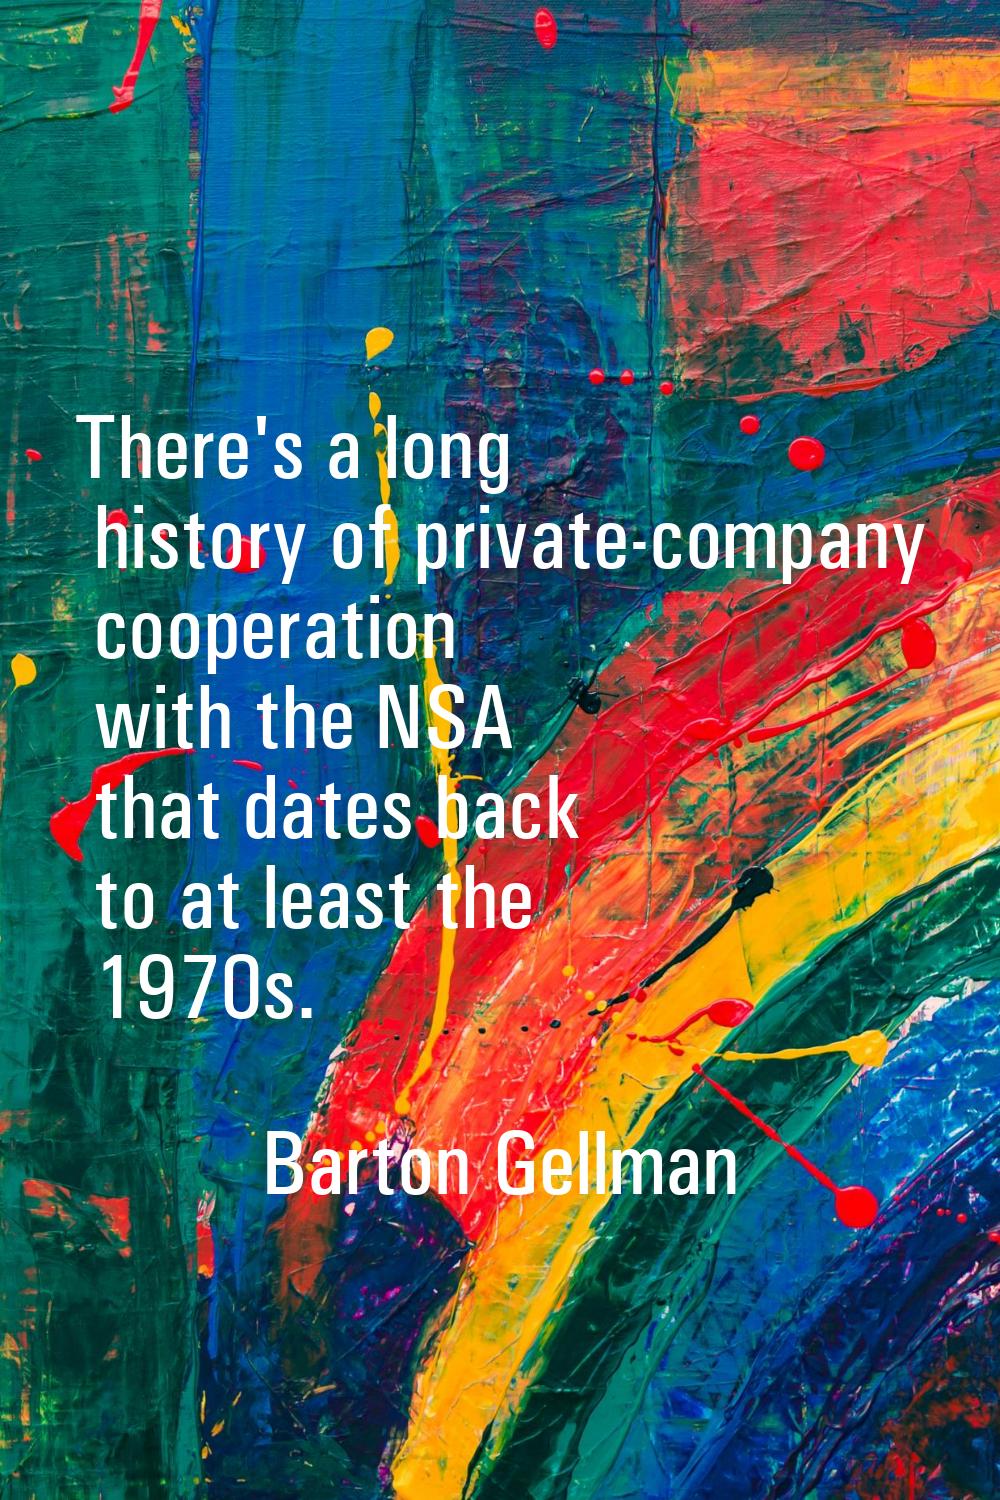 There's a long history of private-company cooperation with the NSA that dates back to at least the 